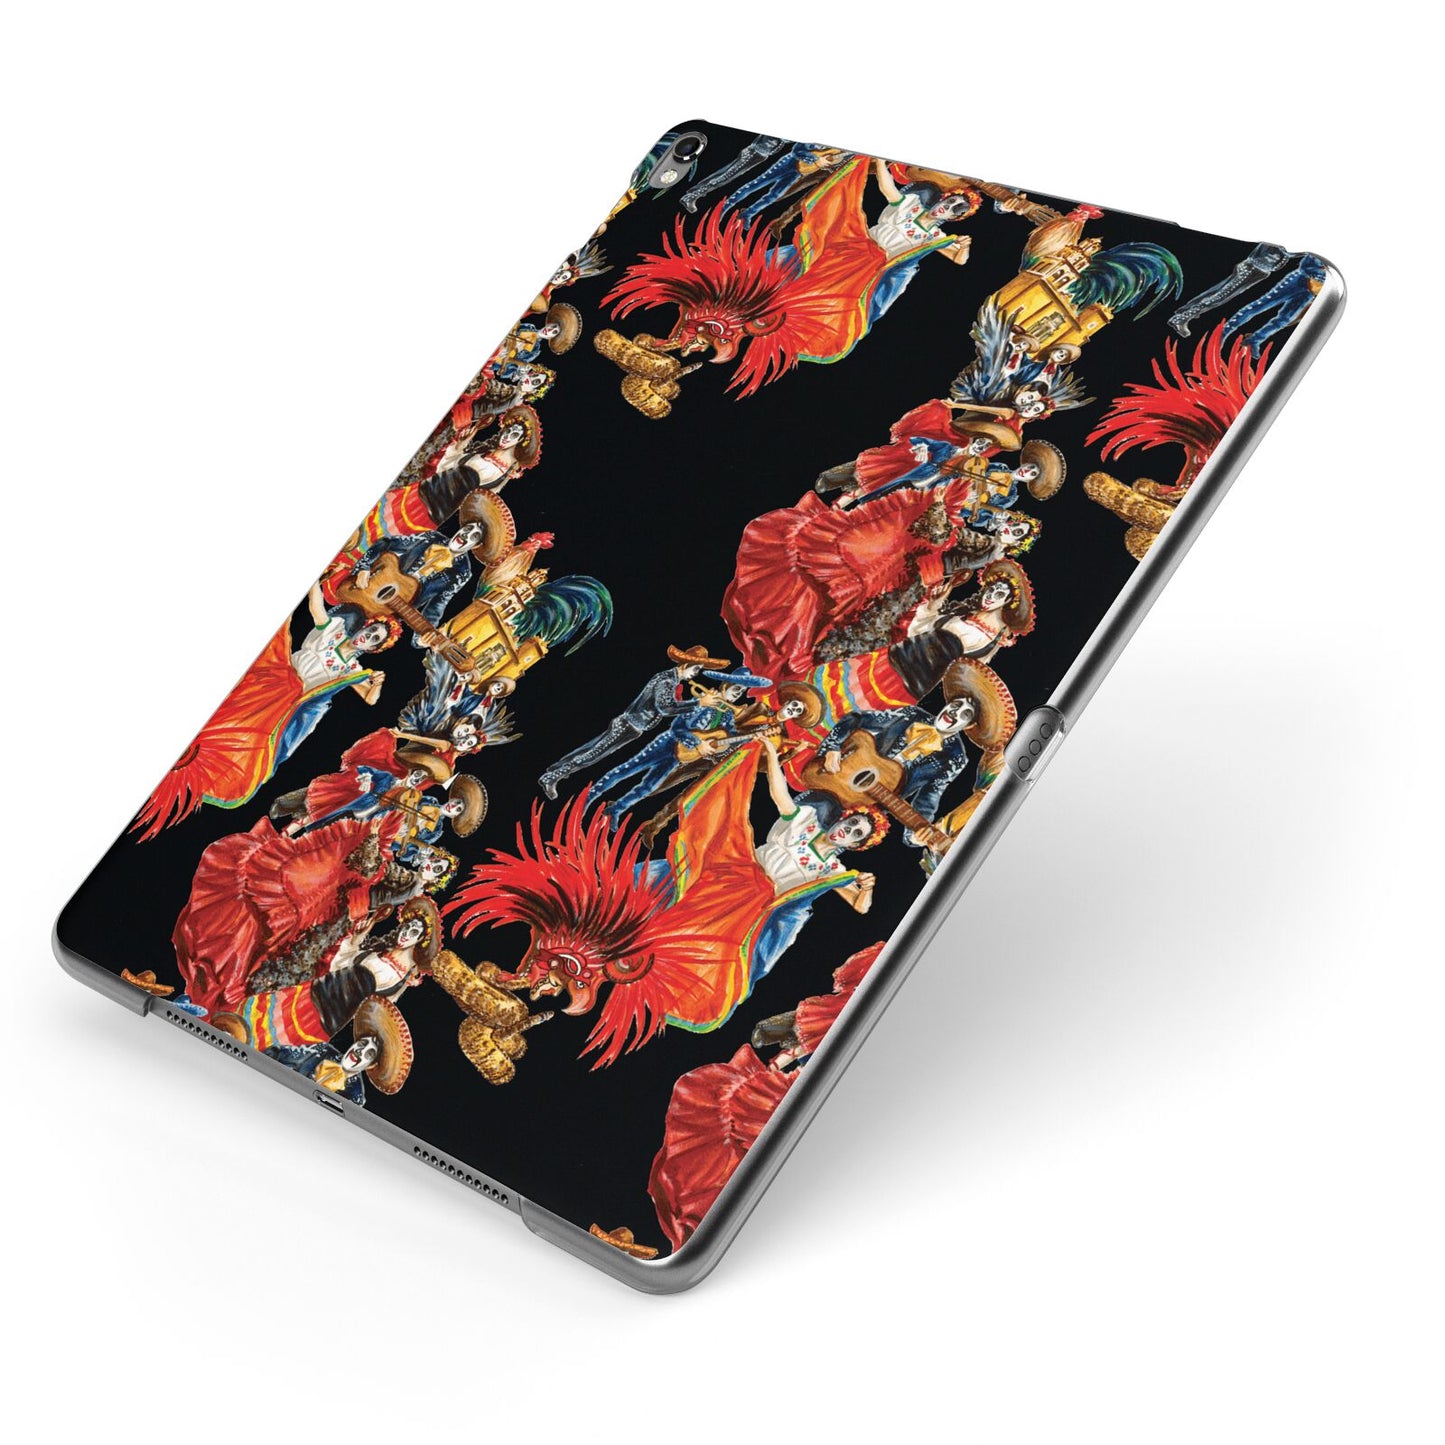 Day of the Dead Festival Apple iPad Case on Grey iPad Side View